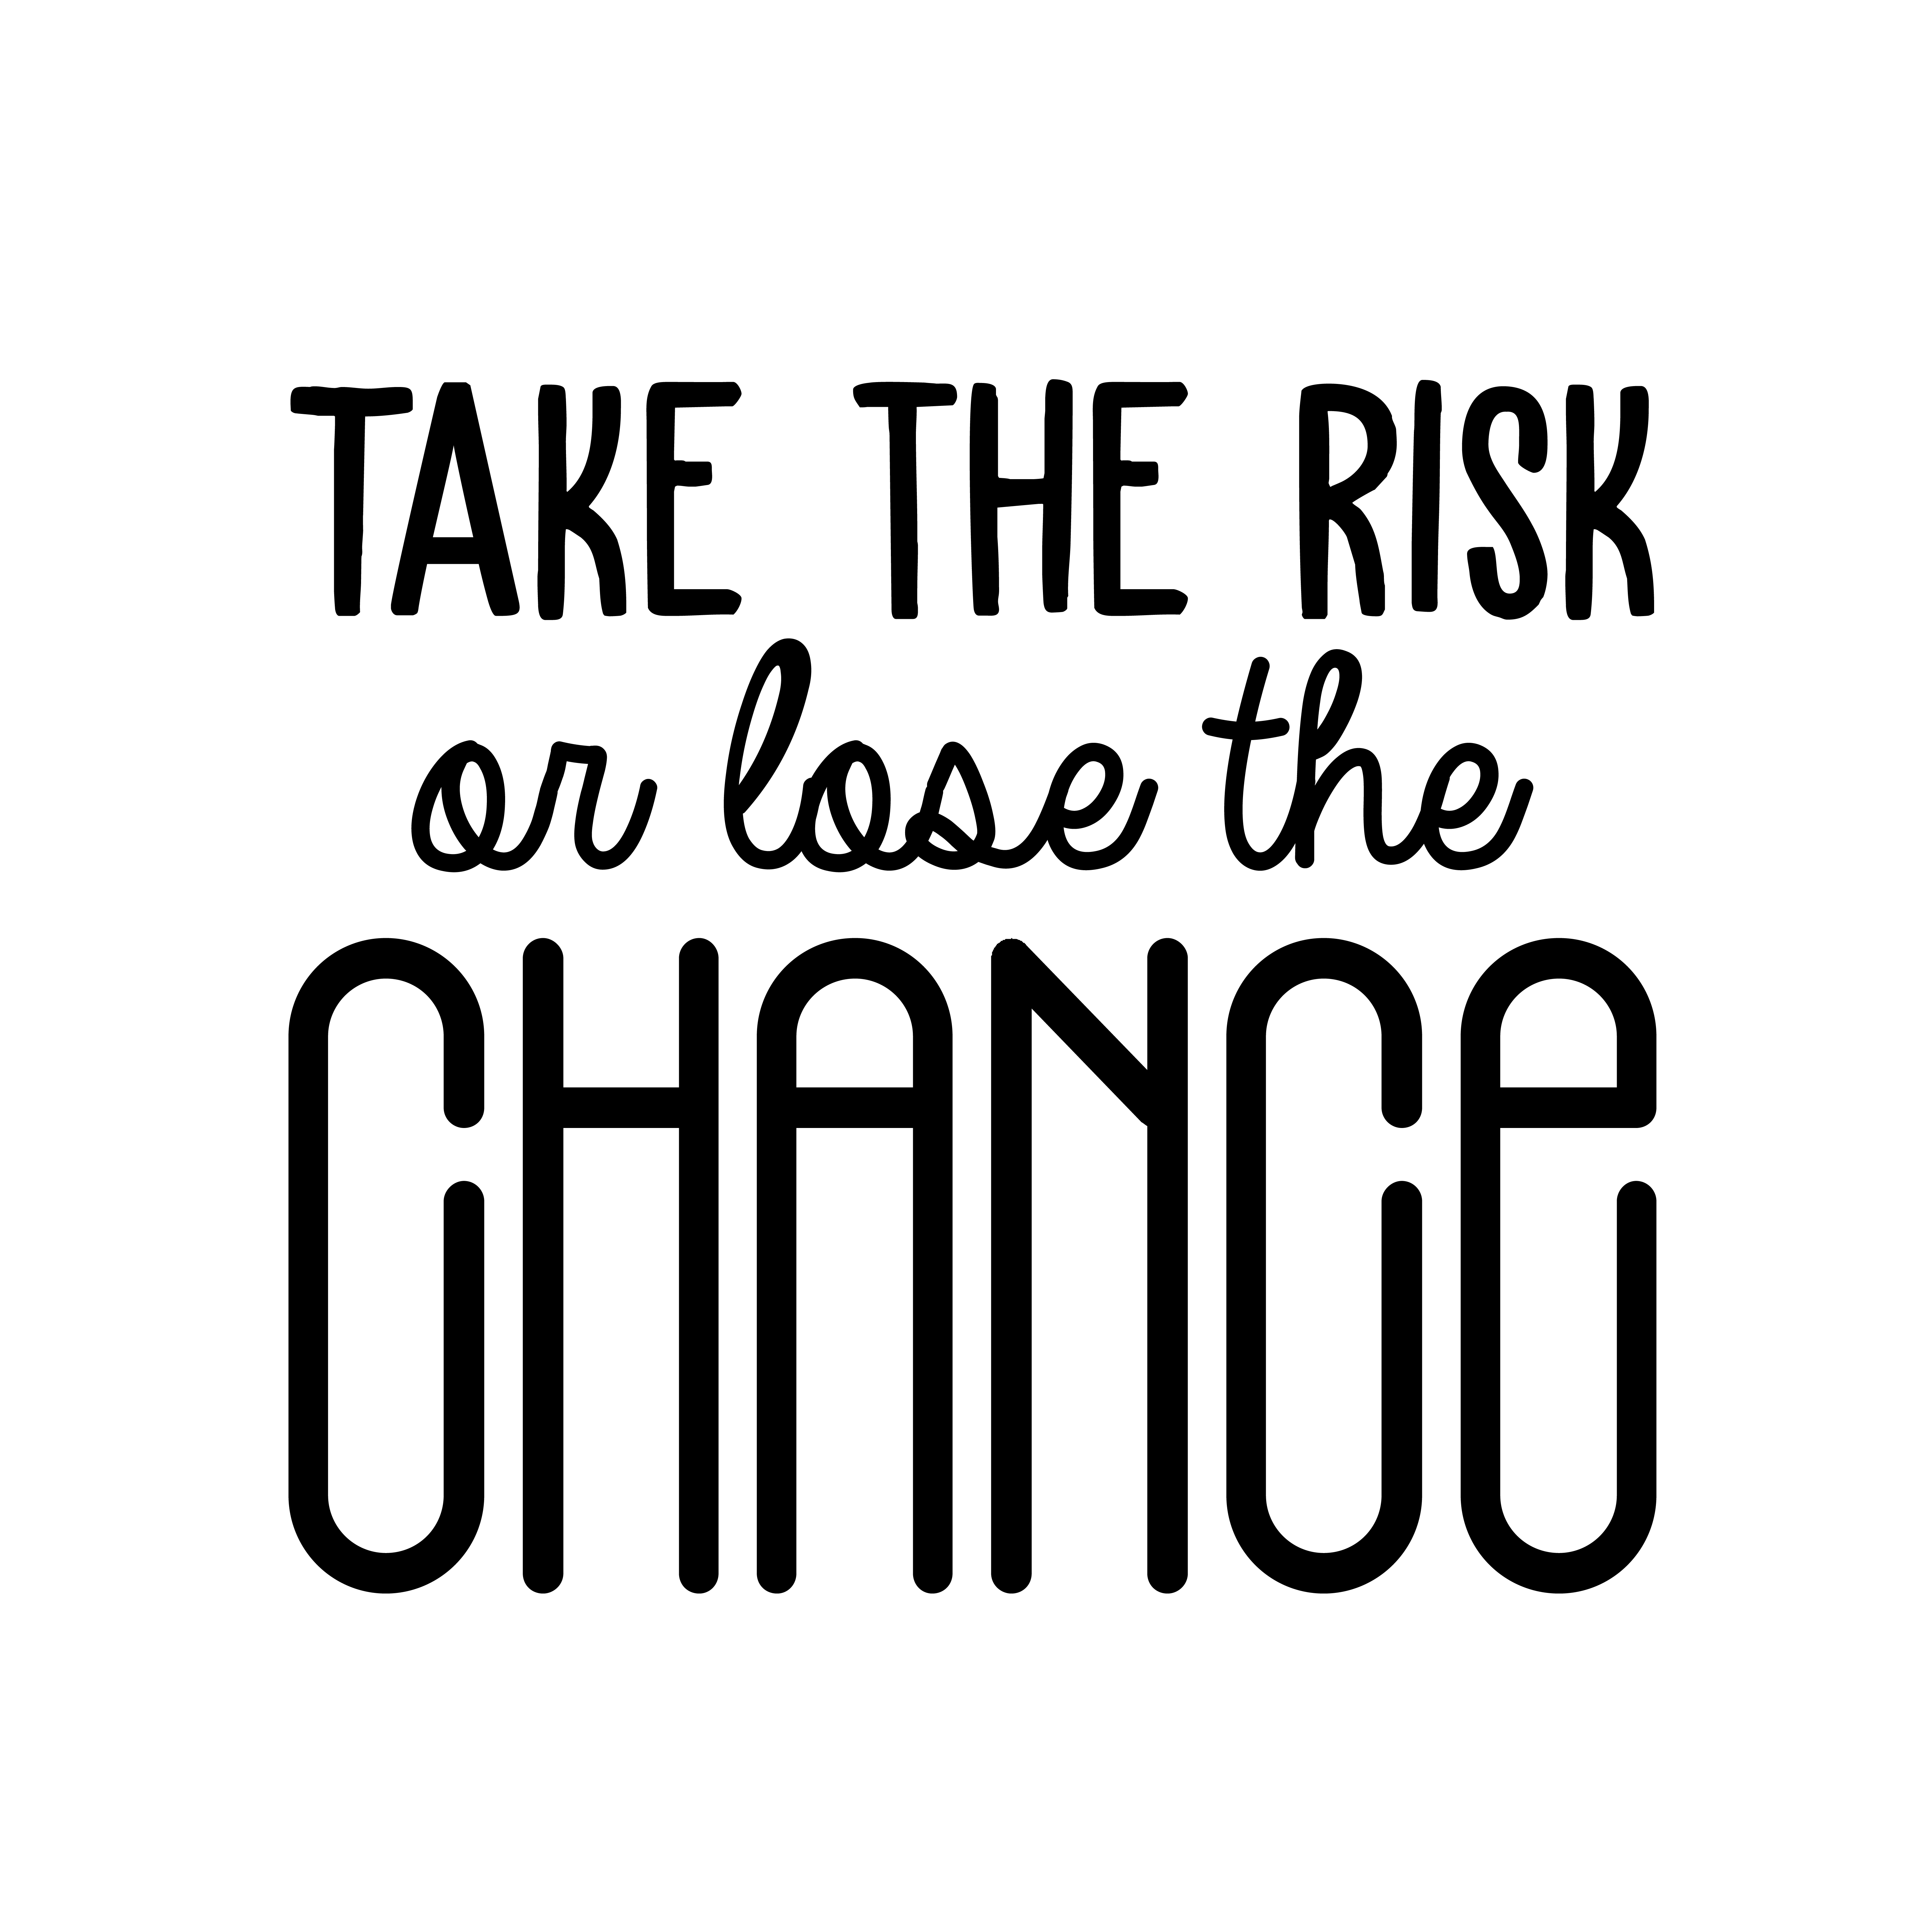 Vinyl Wall Art Decal Take The Risk Or Lose The Chance 22* x 25